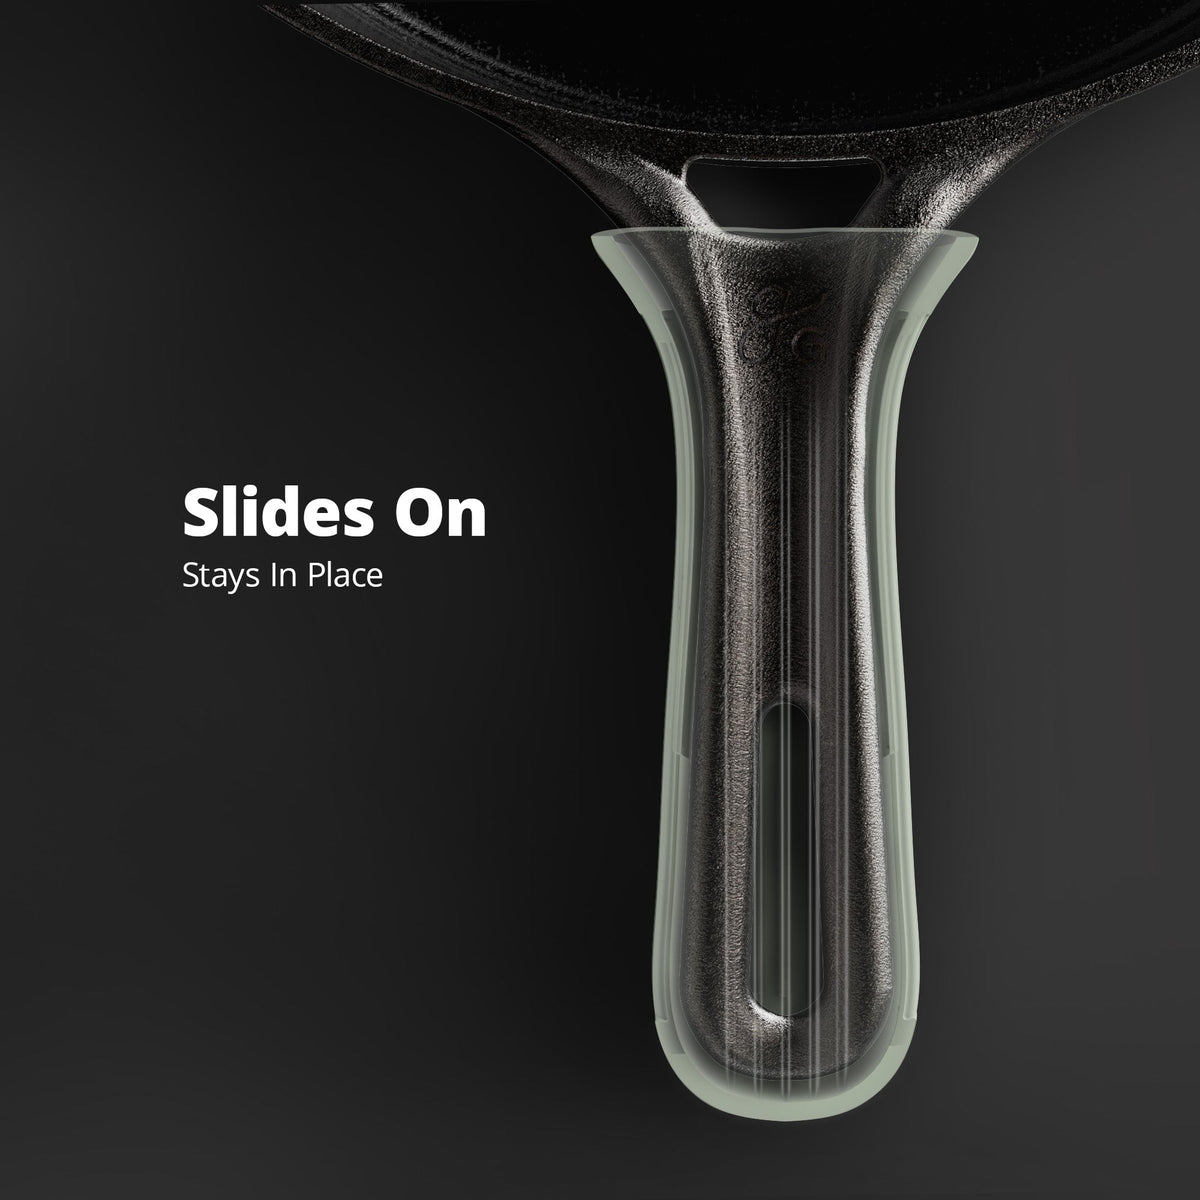 Silicone Handle for gG Cast Iron Skillets (Sage Green)